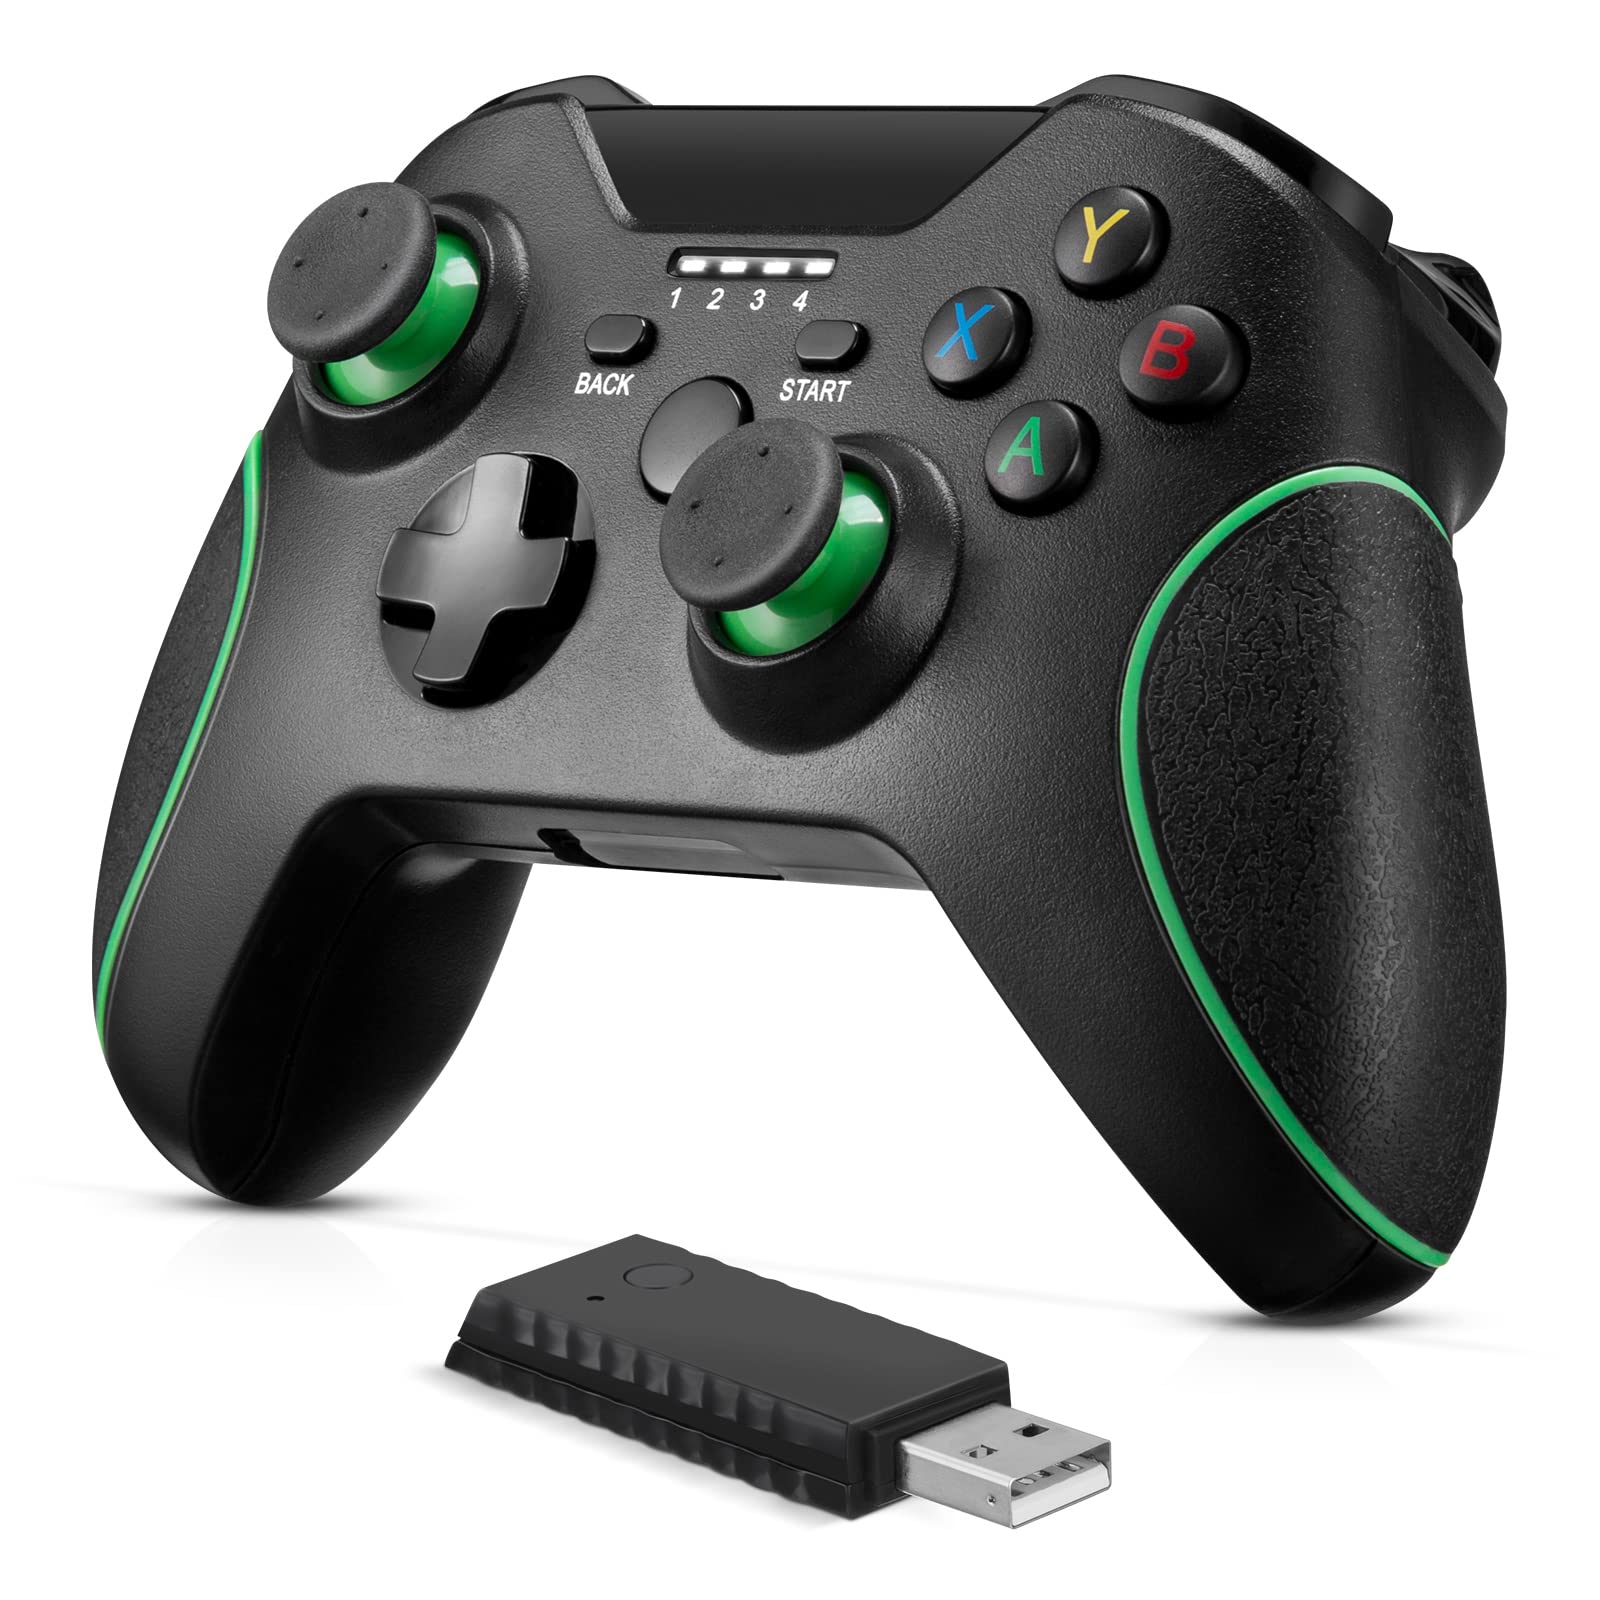 Make sure there are no other wireless devices interfering with the connection between the Xbox One controller and the PC
Move other wireless devices away from the PC and controller to reduce interference